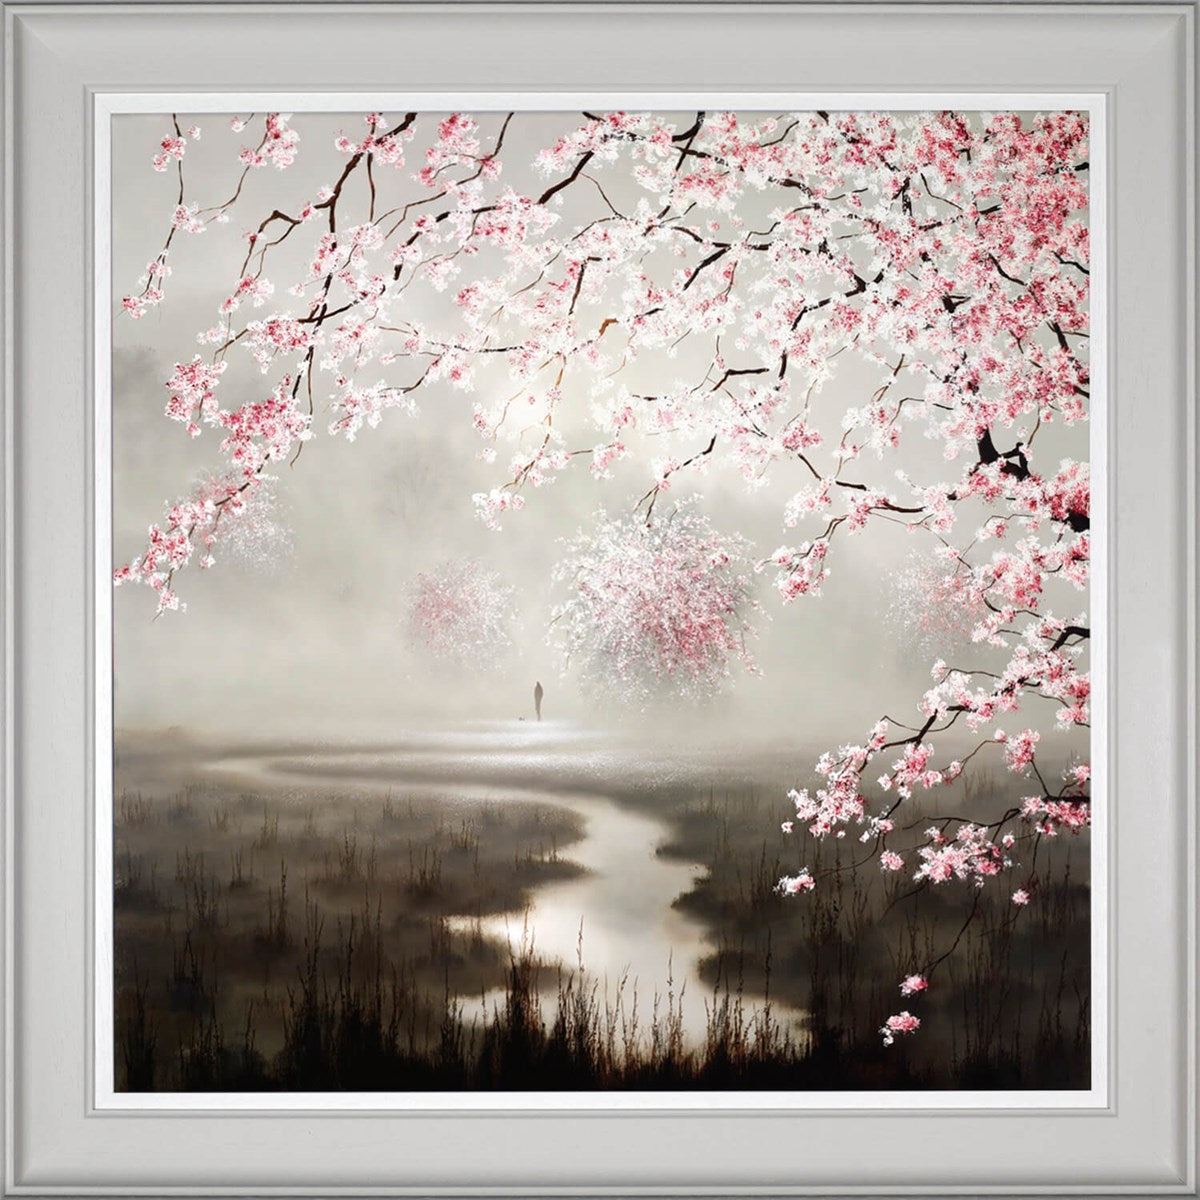 Out in Nature limited edition framed print by John Waterhouse